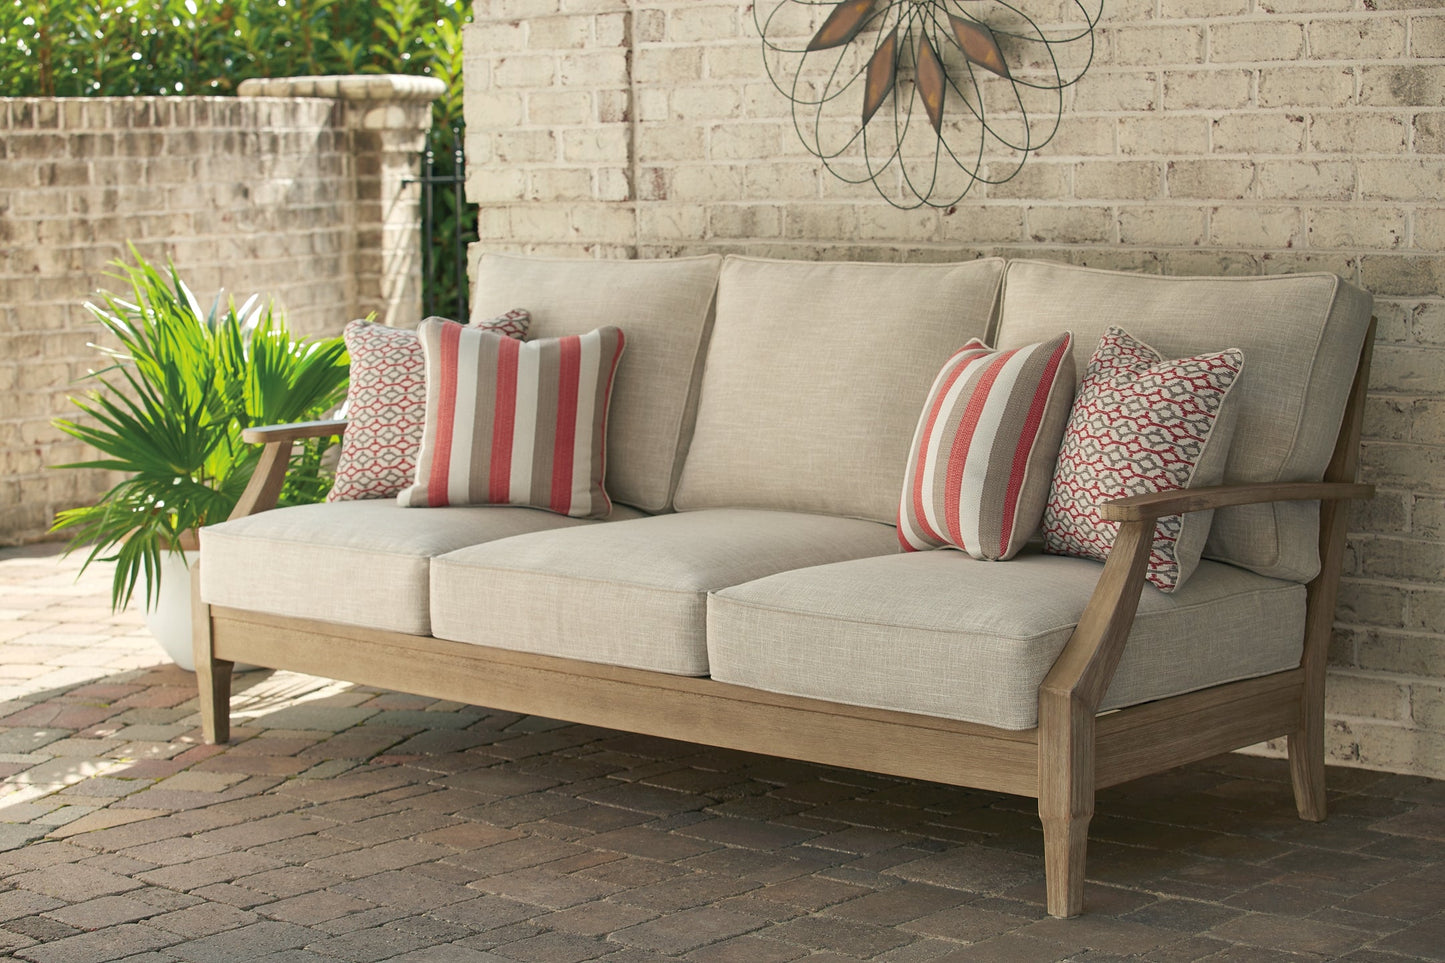 Clare View Sofa with Cushion at Walker Mattress and Furniture Locations in Cedar Park and Belton TX.